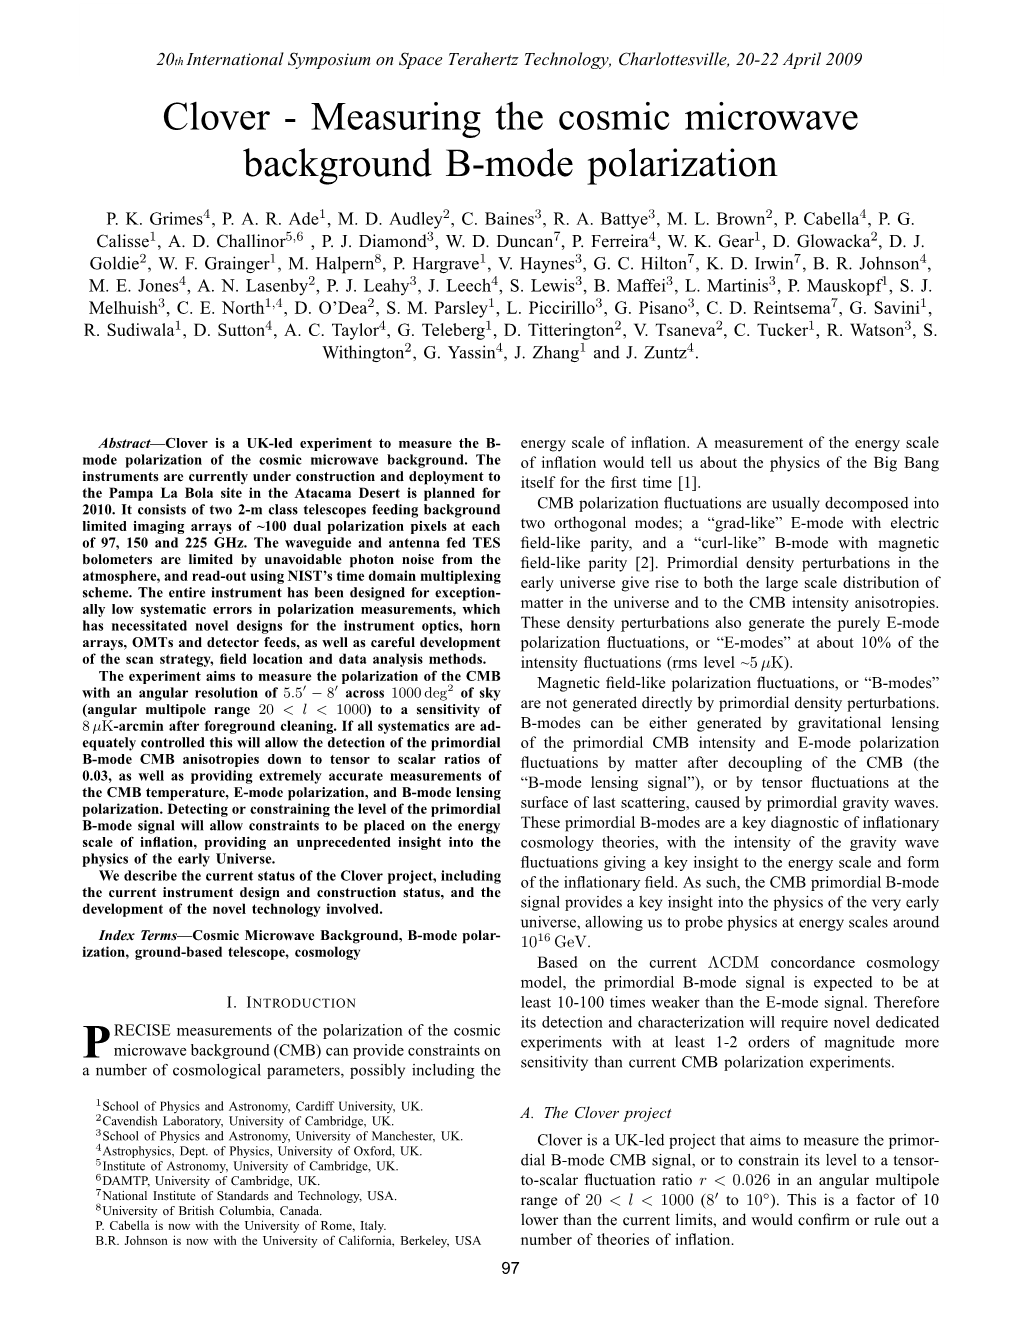 Clover - Measuring the Cosmic Microwave Background B-Mode Polarization